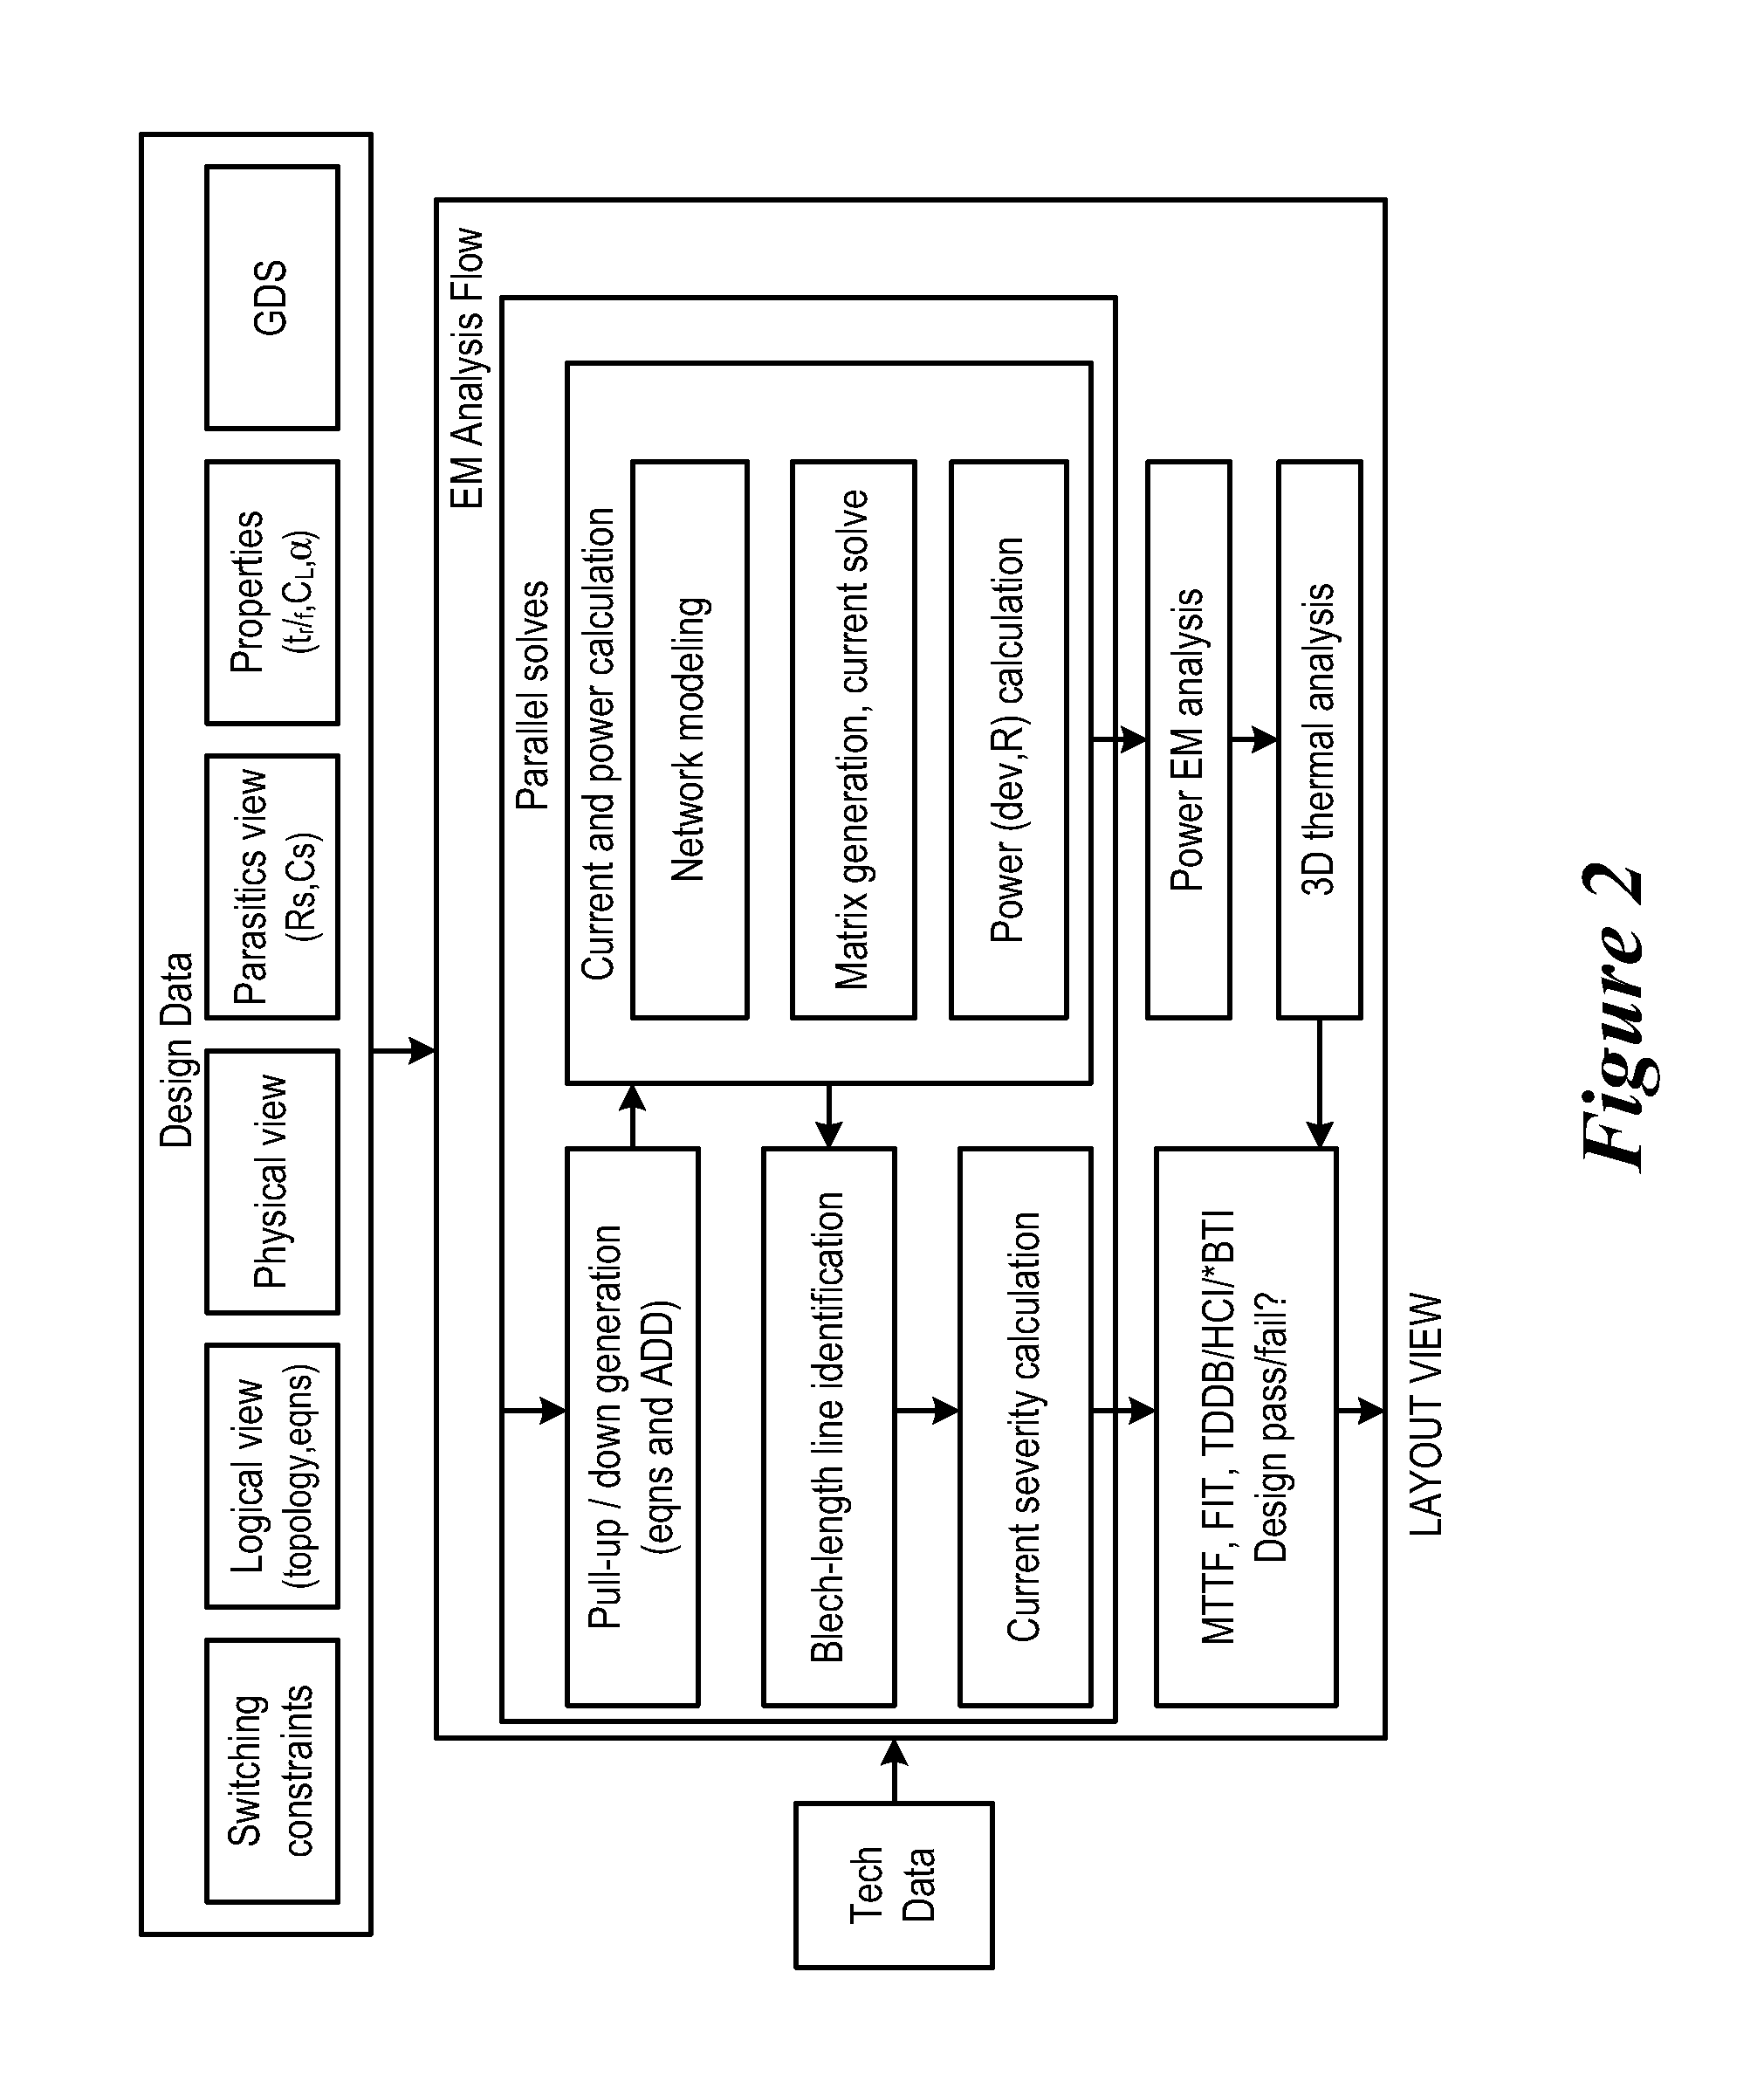 Interconnect and Transistor Reliability Analysis for Deep Sub-Micron Designs